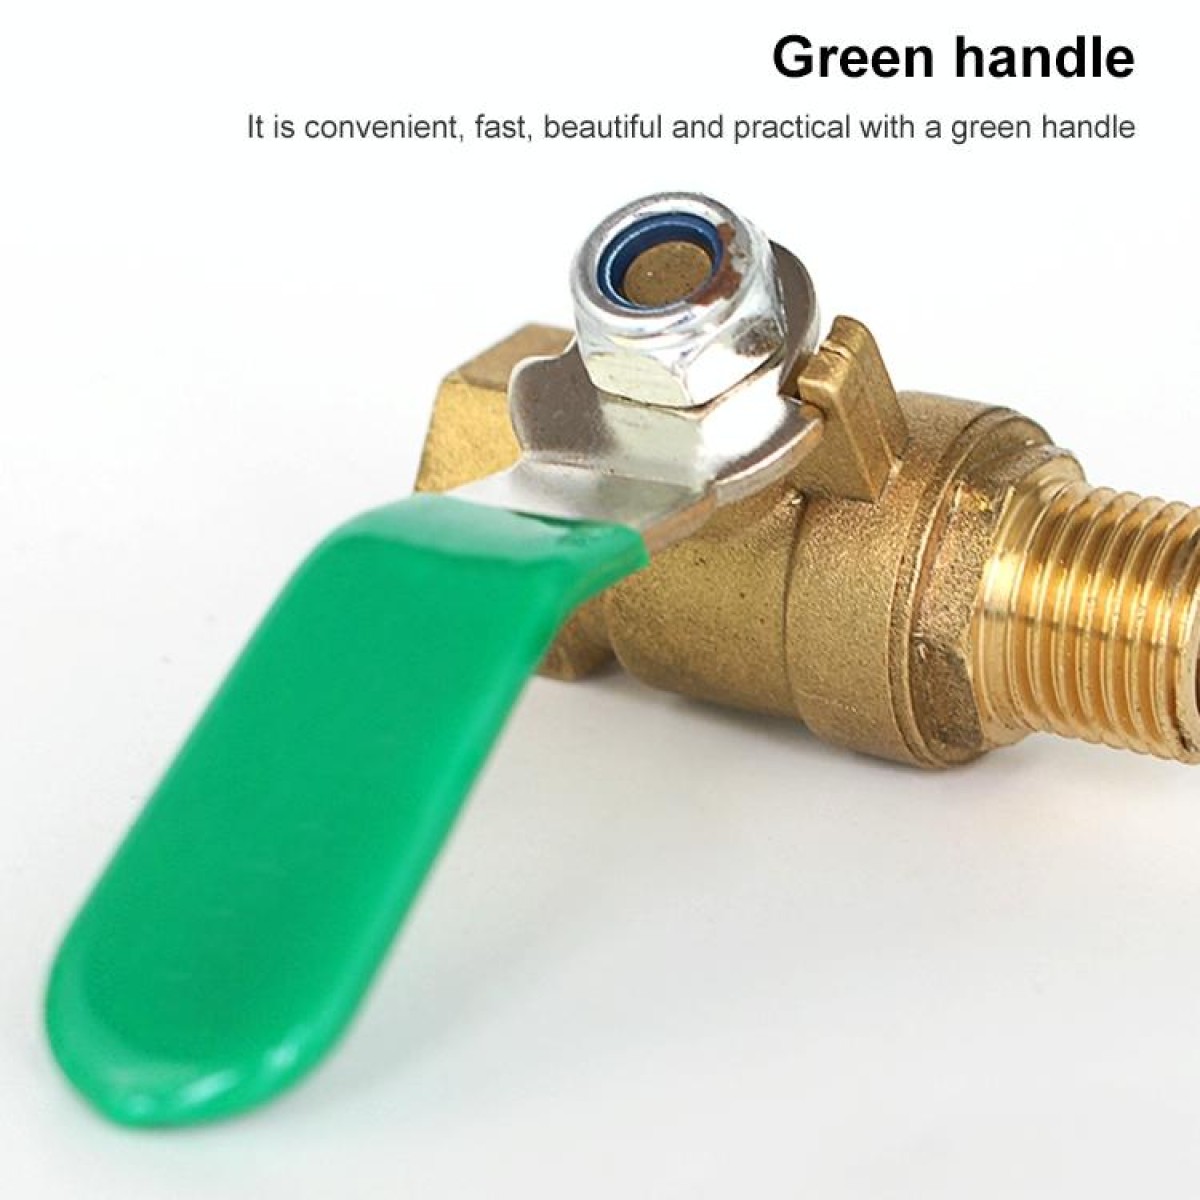 LAIZE Pneumatic Hose Connector Thickened Brass Ball Valve, Size:Double Outside 3 Point 3/8 inch